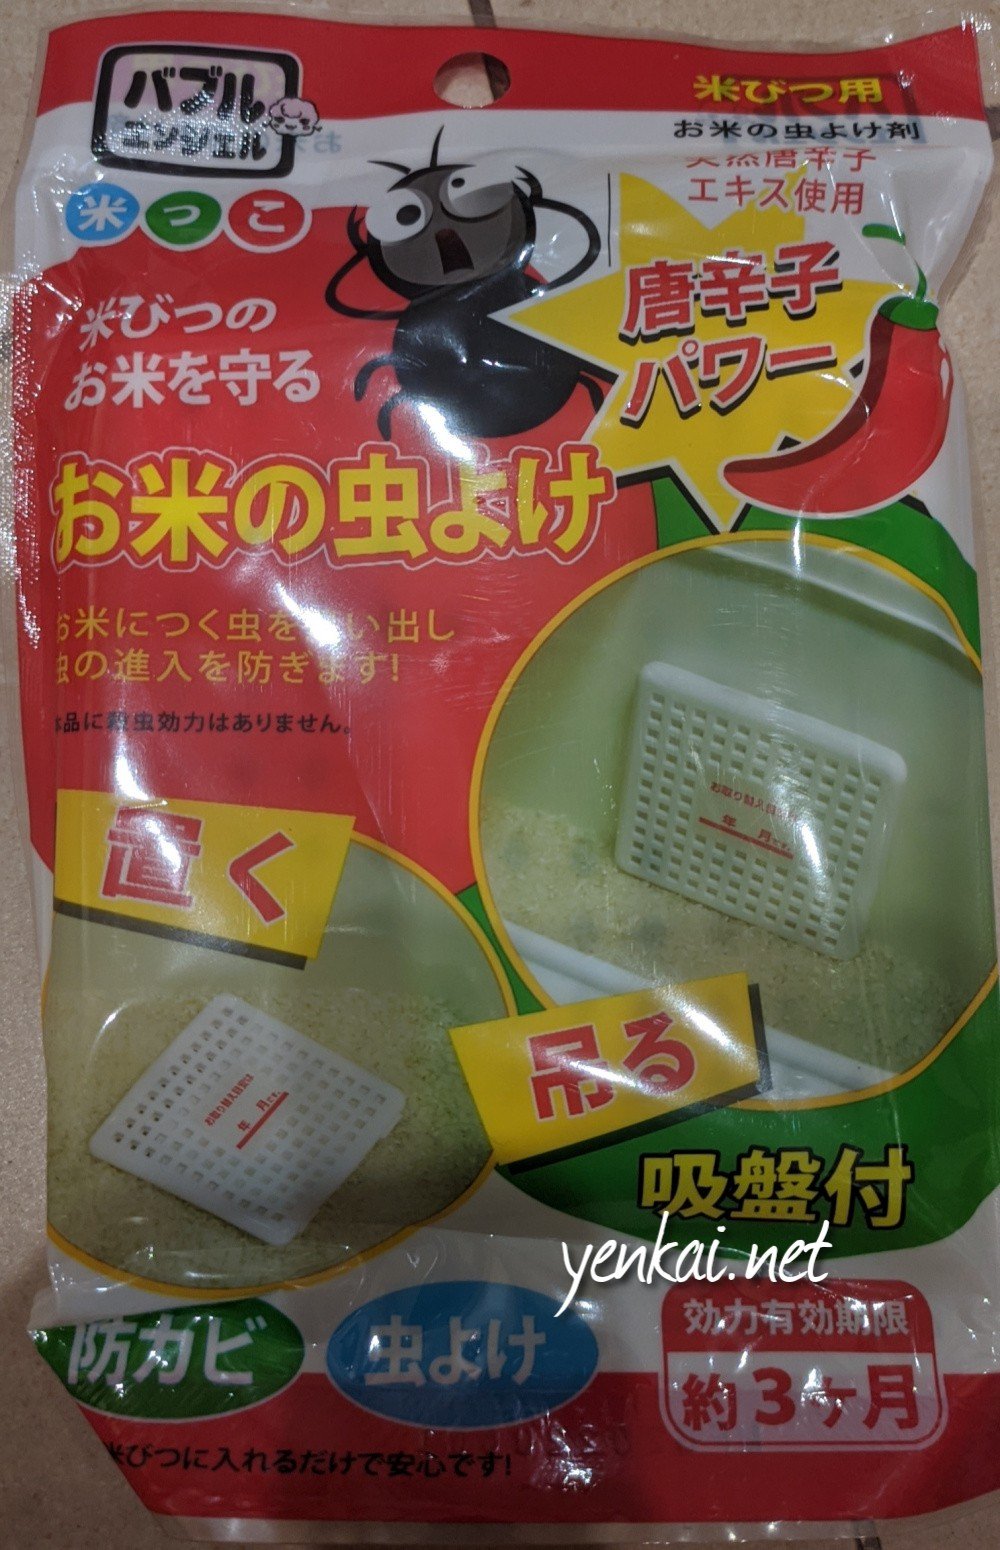 Taobao product recommendation – Rice weevils eradicator